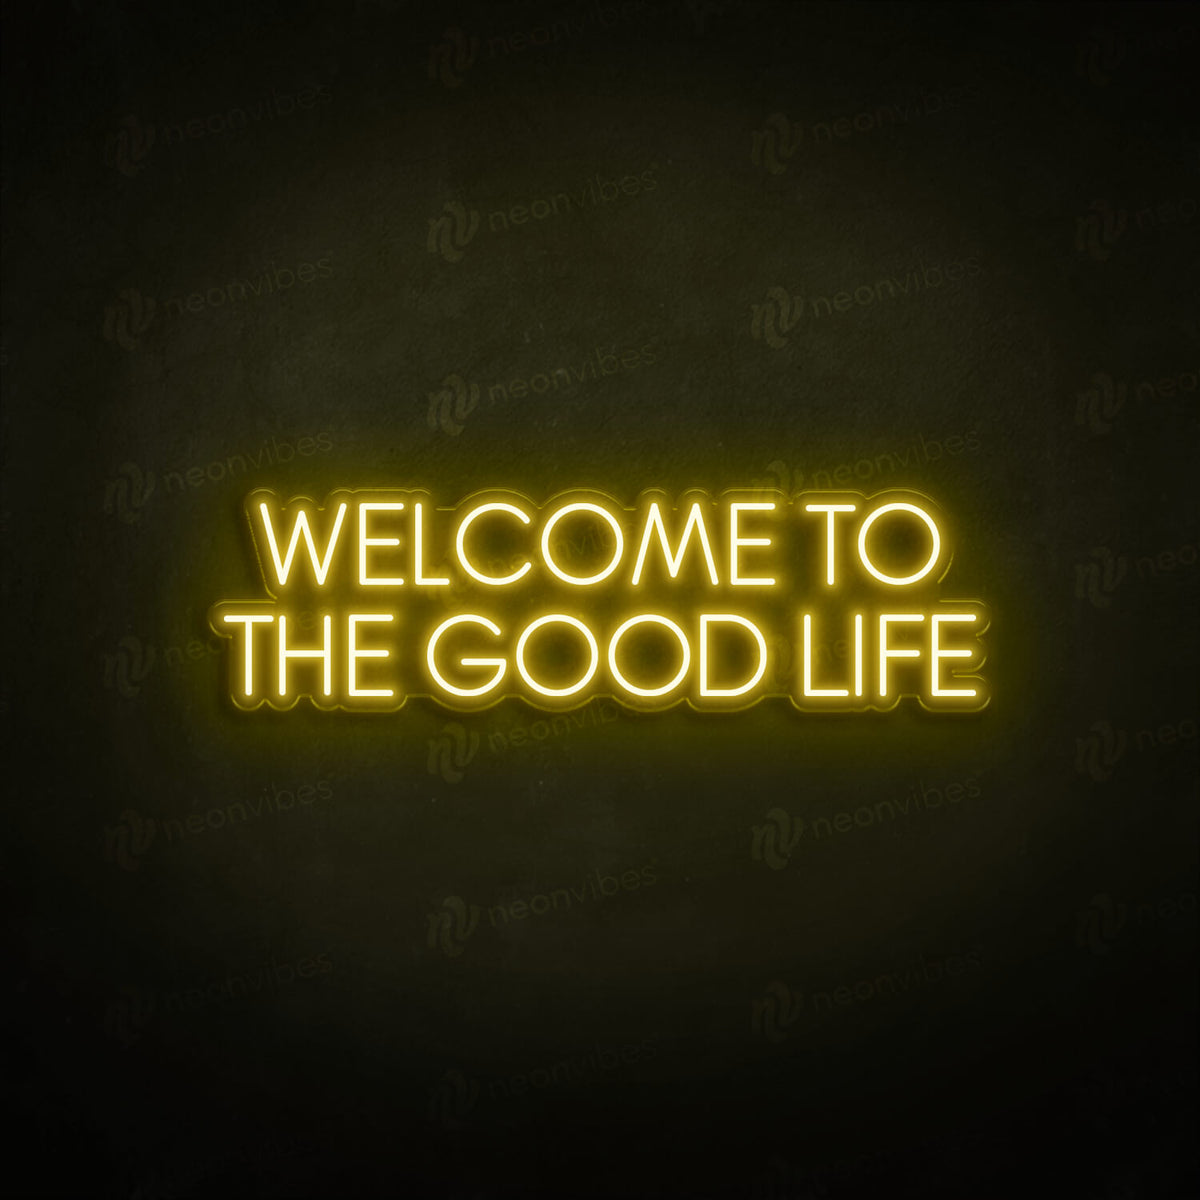 Welcome To The Good Life neon sign